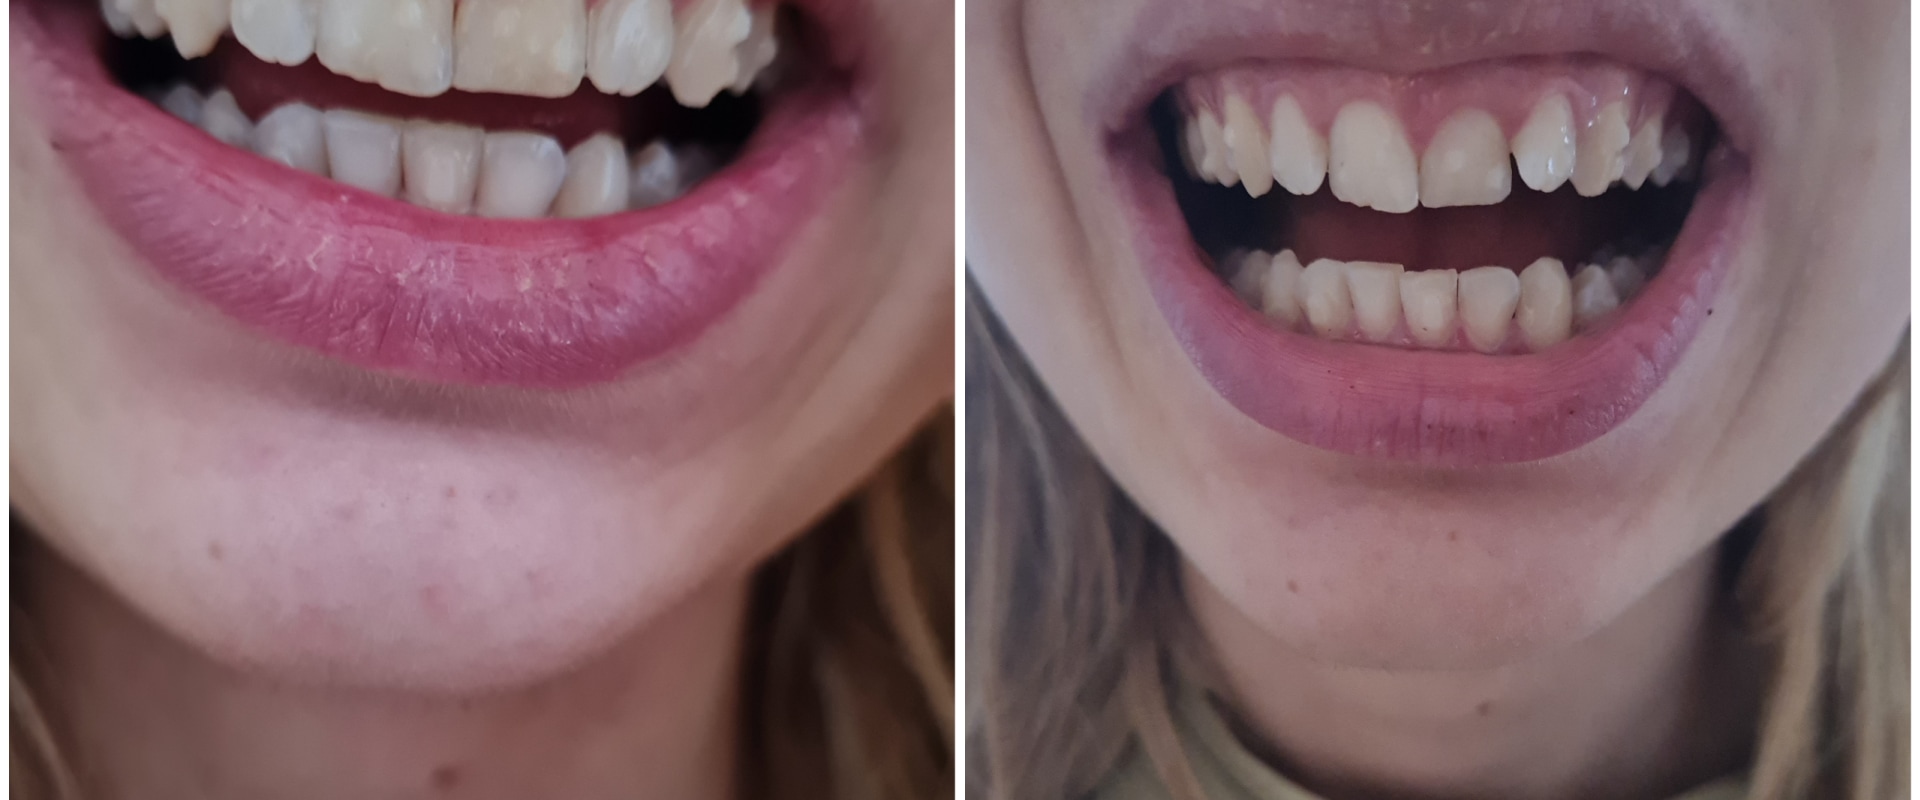 Can I Get a Refund for Unsatisfactory Invisalign Treatment Results?